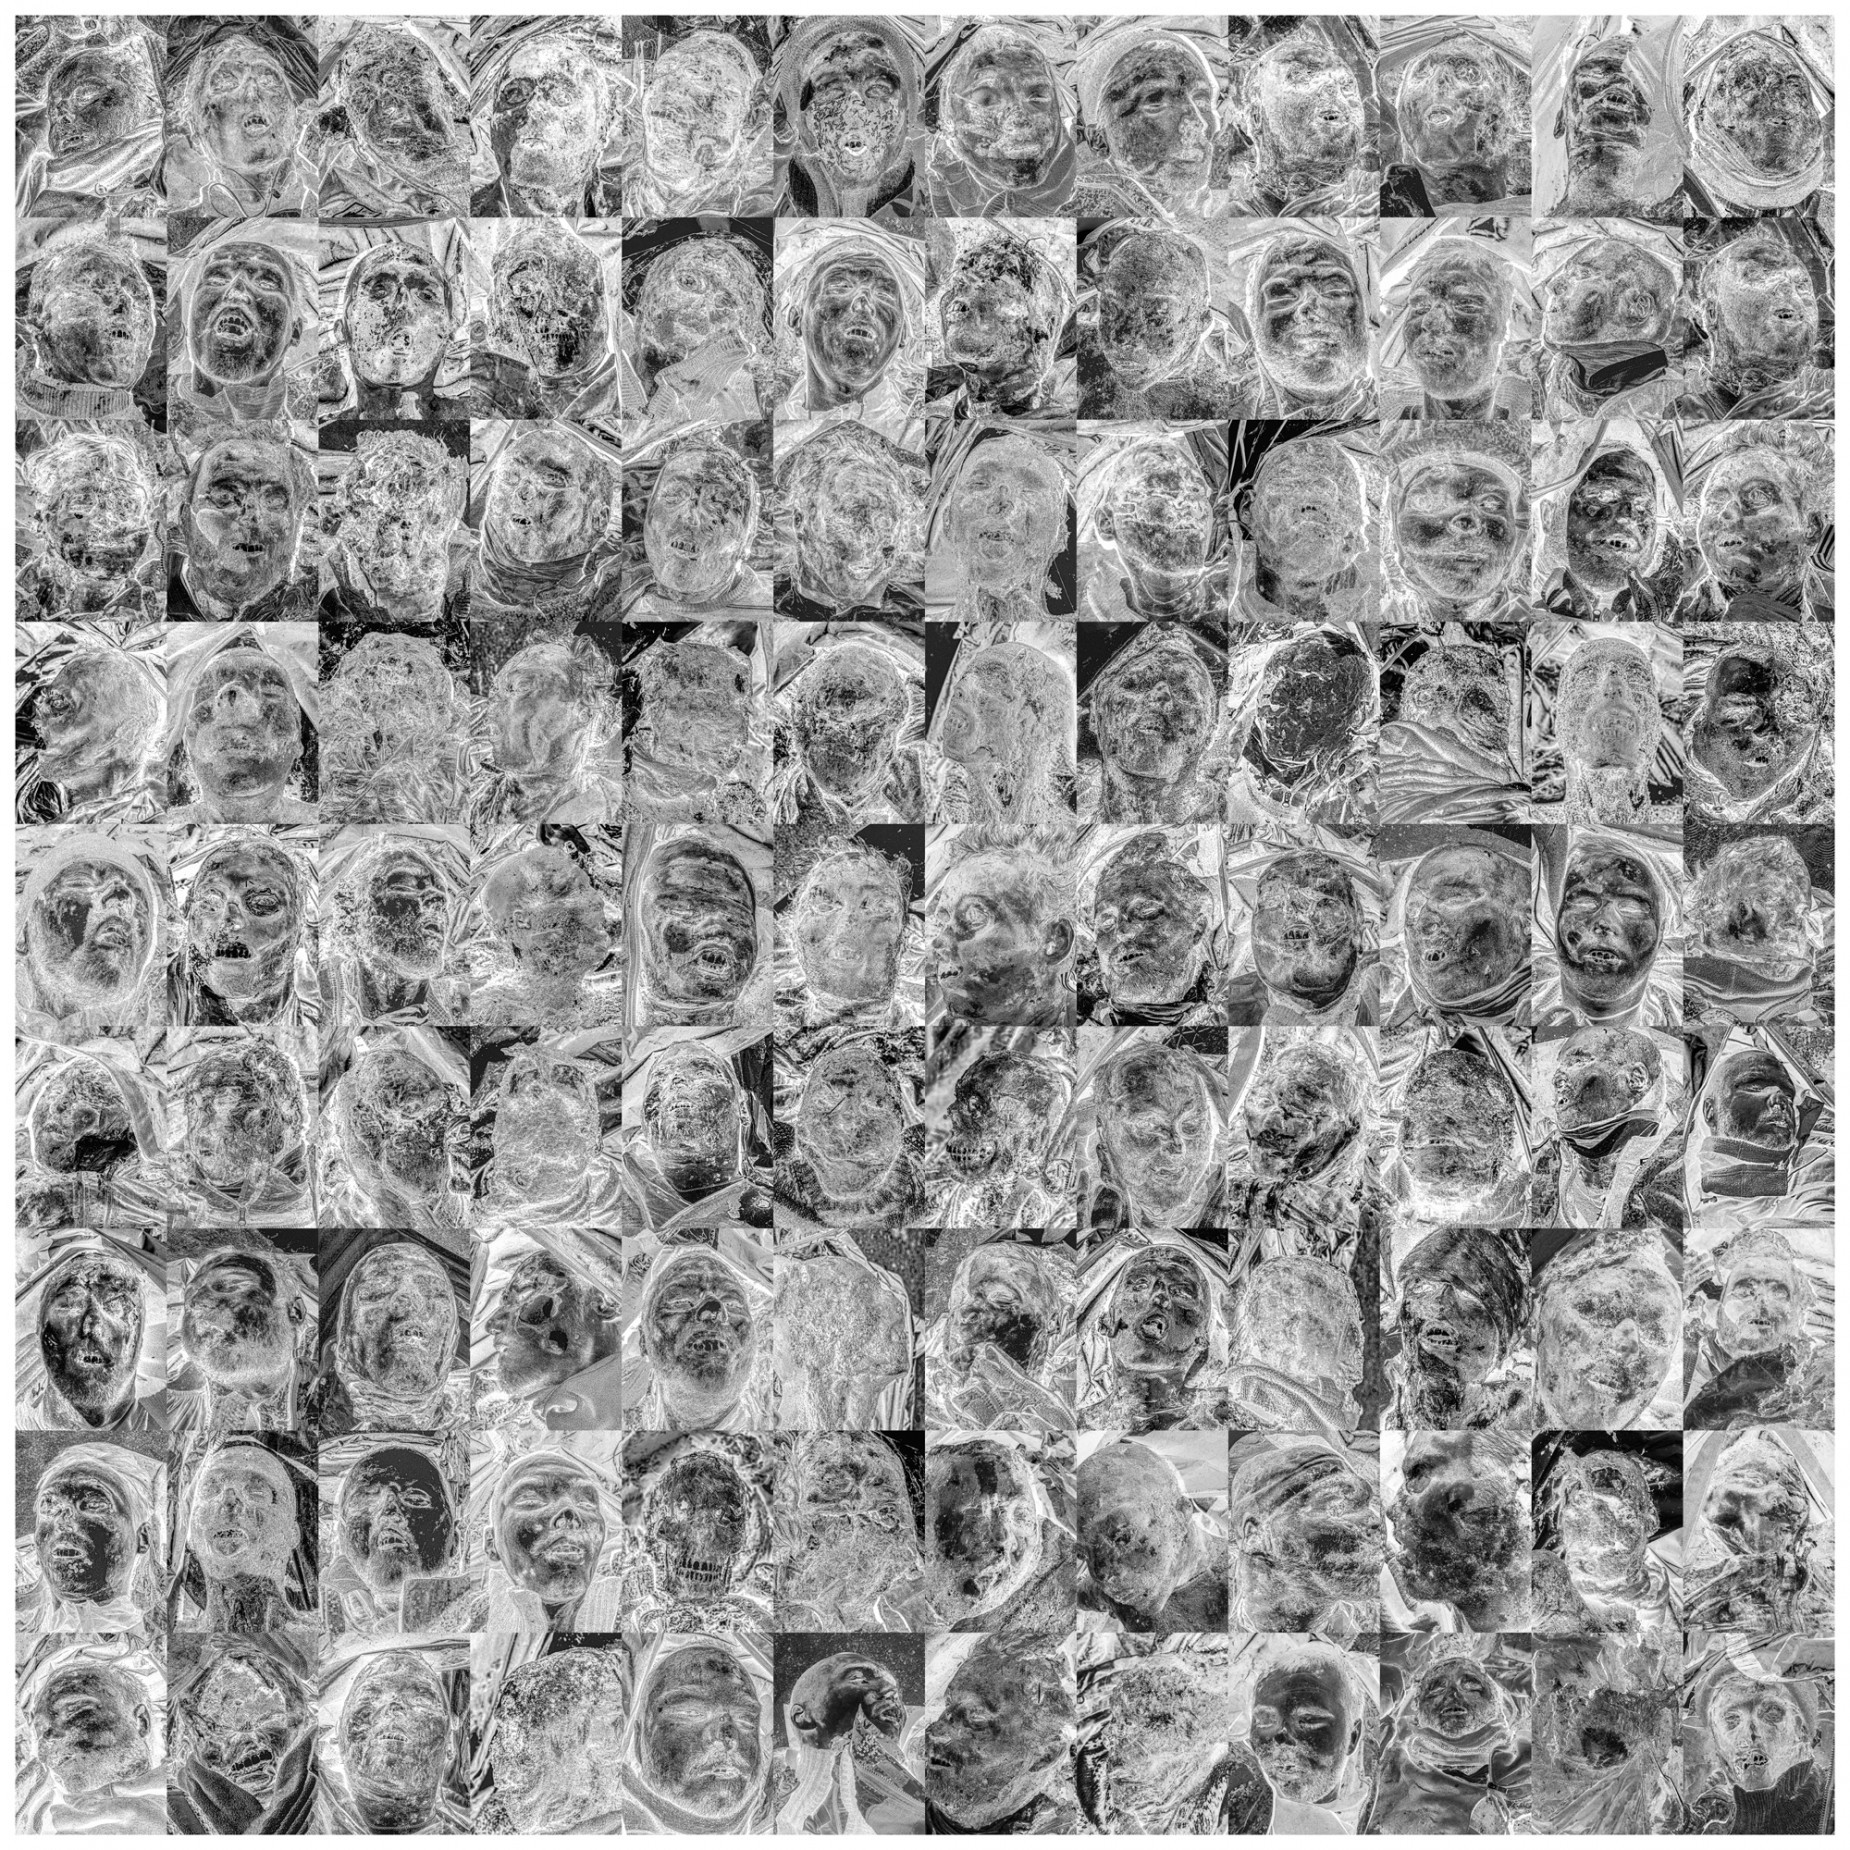 Fig.4 Antoine d’Agata. Faces of Dead Russian Soldiers, May 2022 | Le Monde